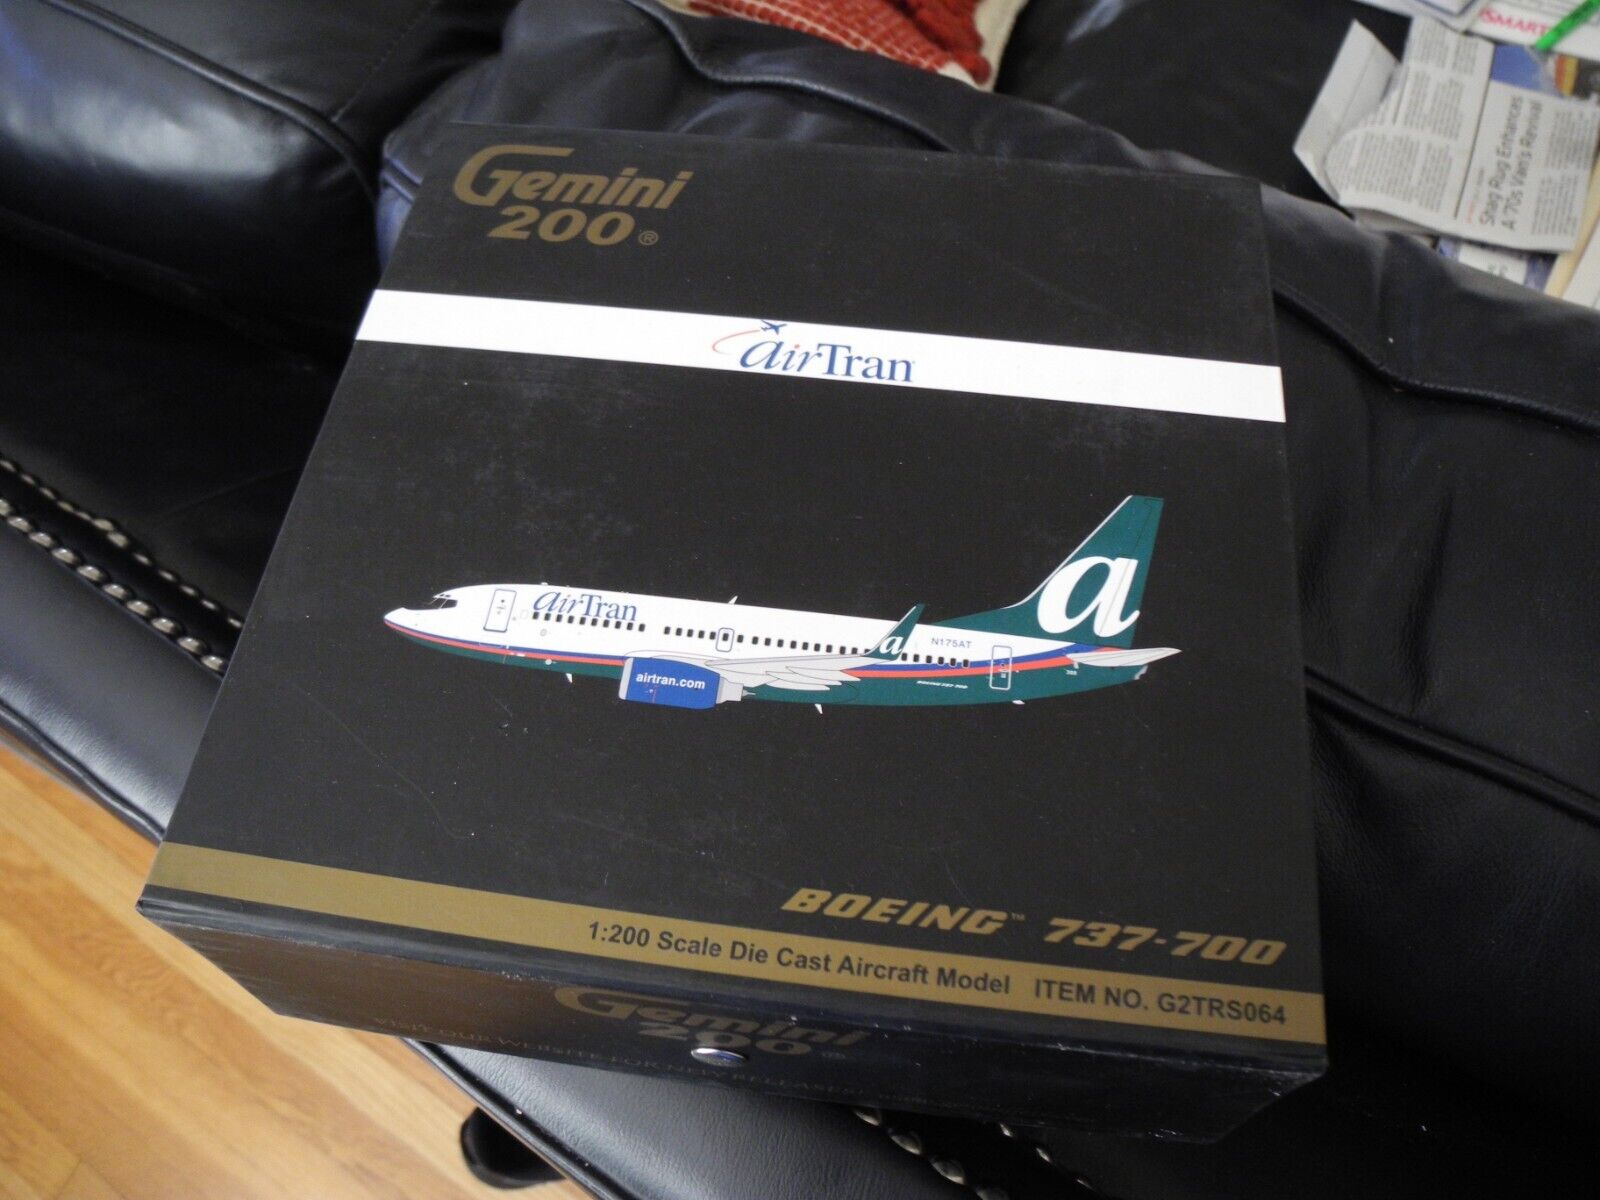 Extremely RARE Gemini 200 Boeing 737 Air Tran, Retired, 2009 Version